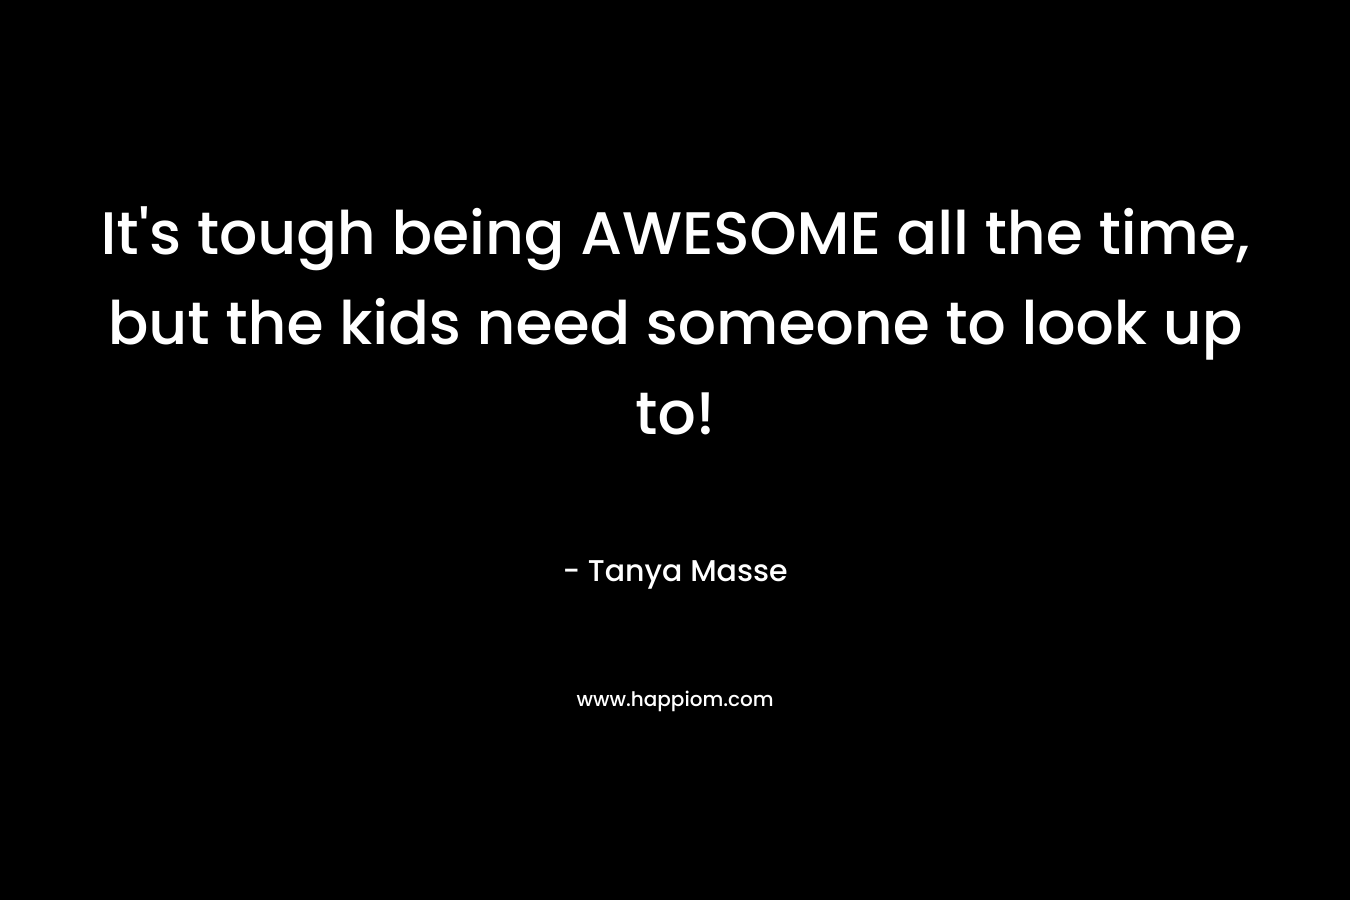 It’s tough being AWESOME all the time, but the kids need someone to look up to! – Tanya Masse